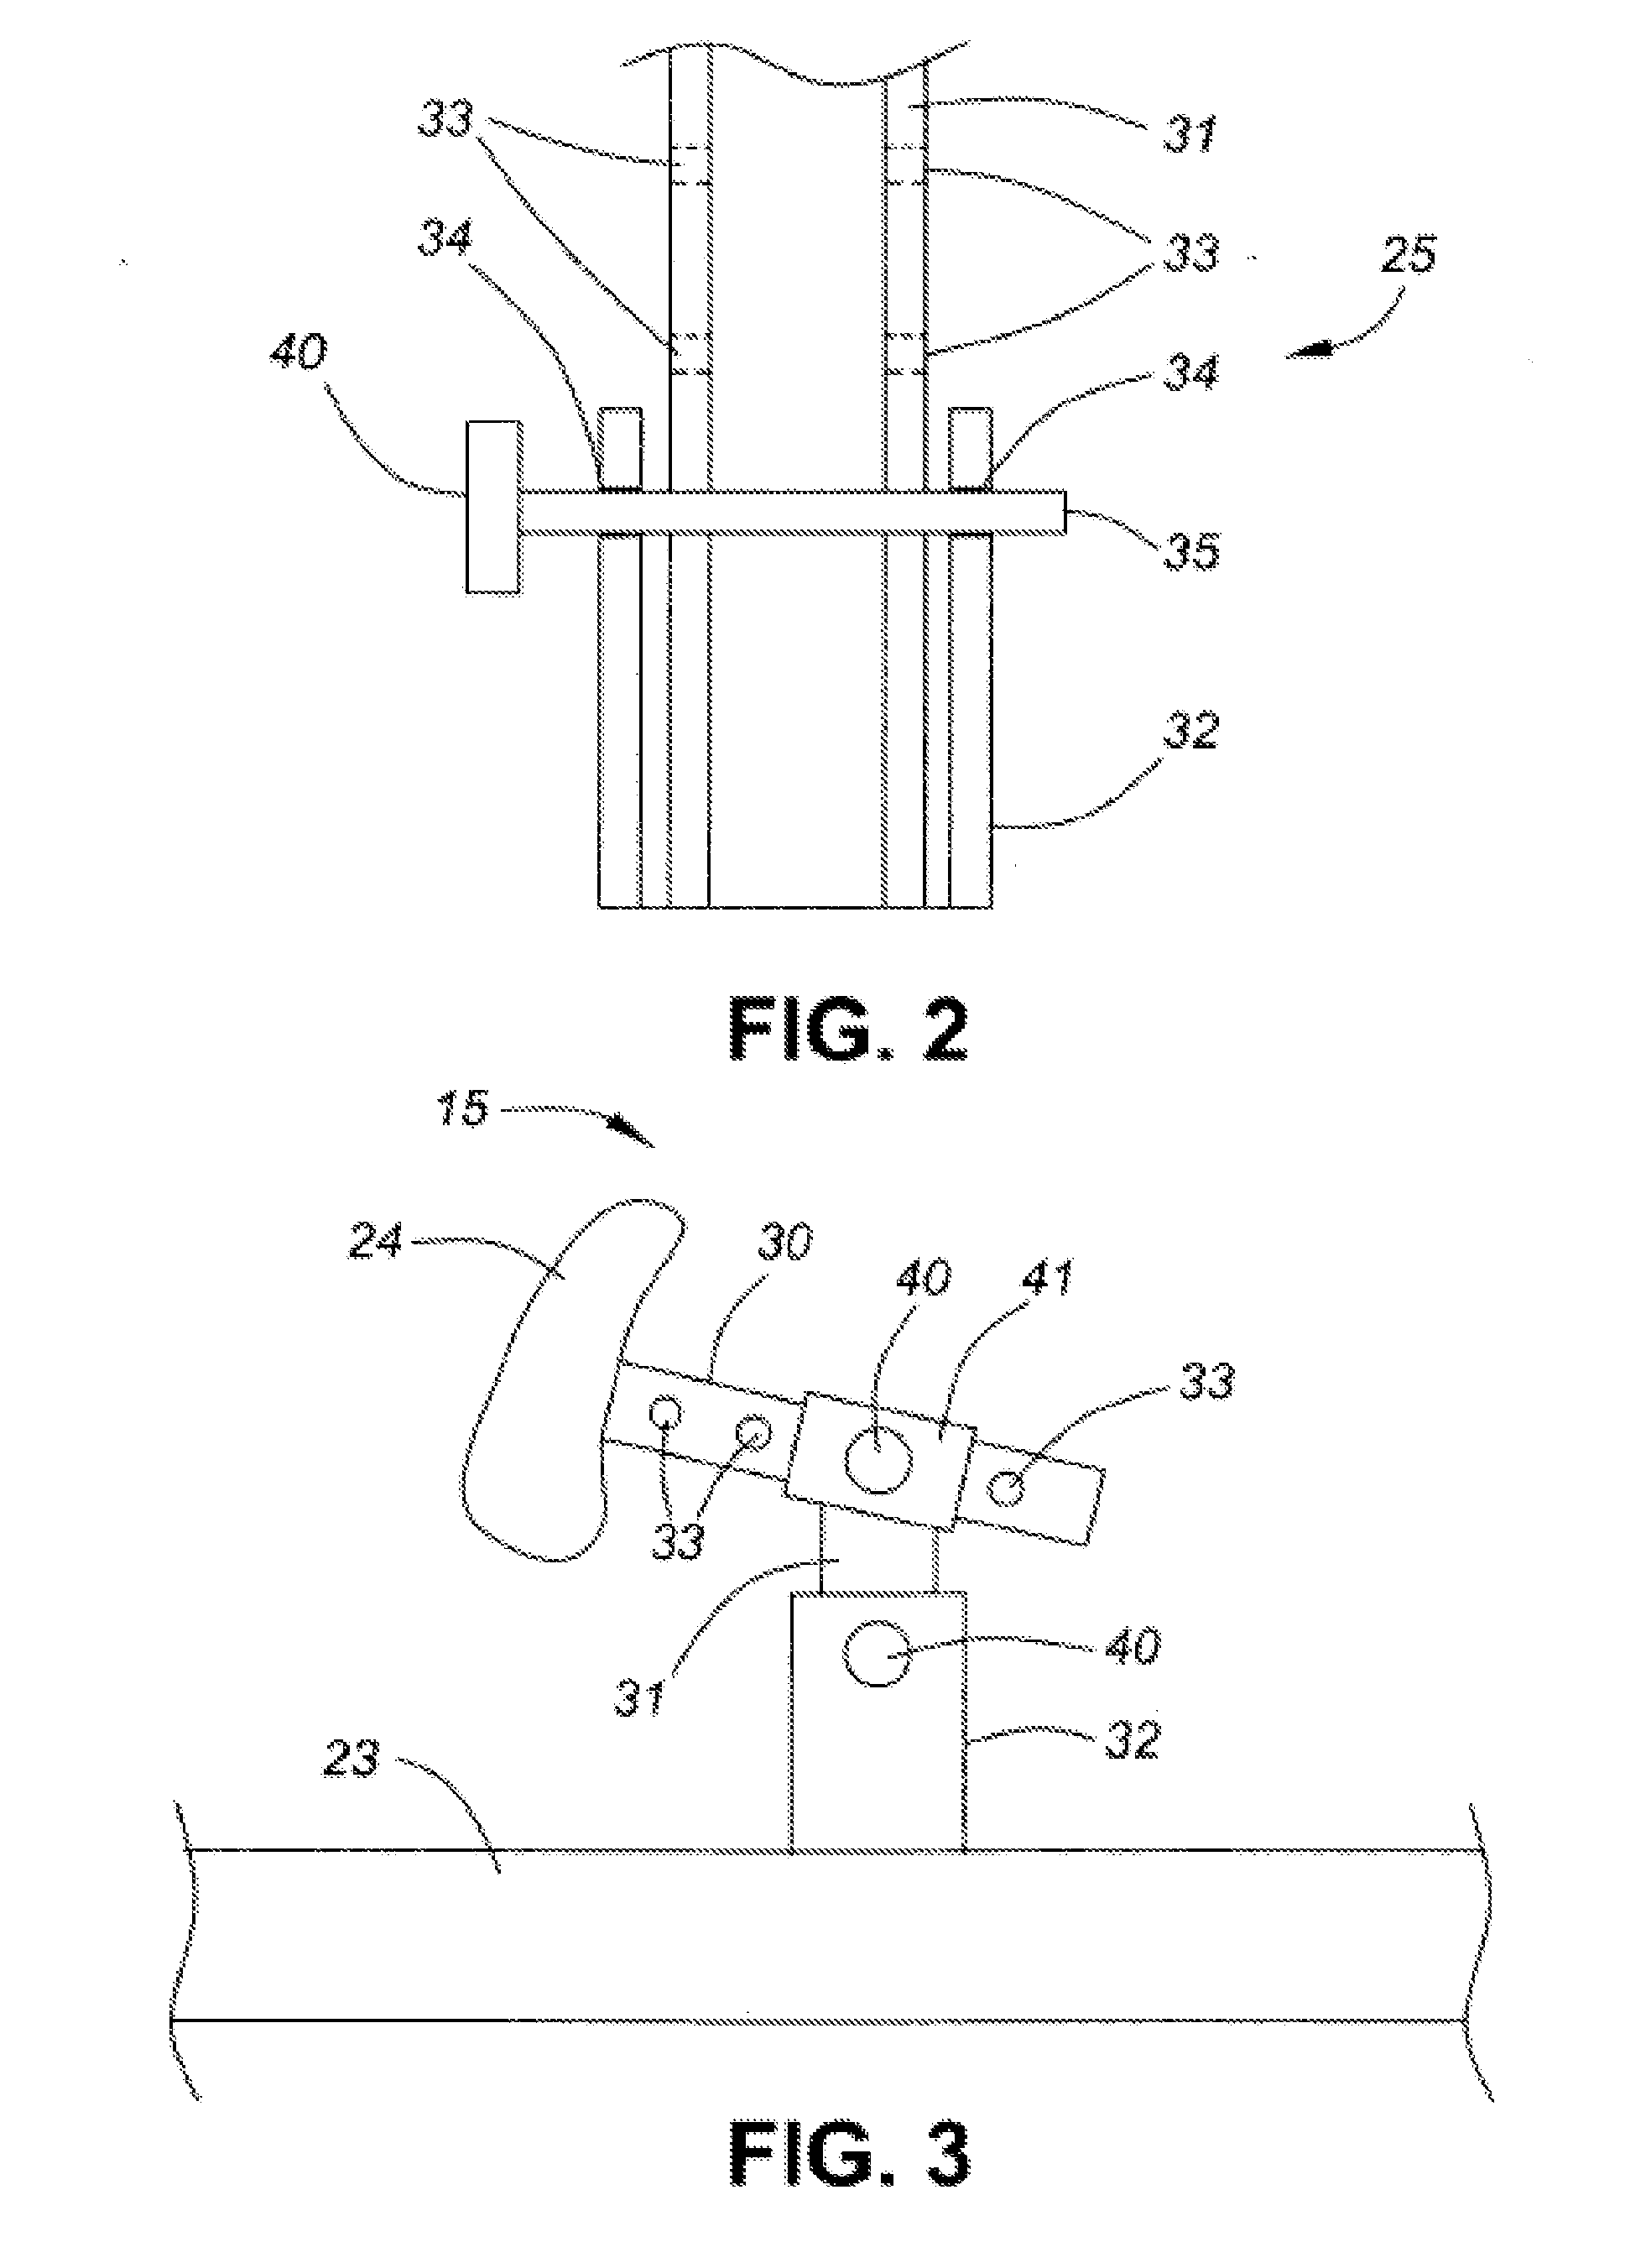 Apparatus for assisting a person to stand and walk